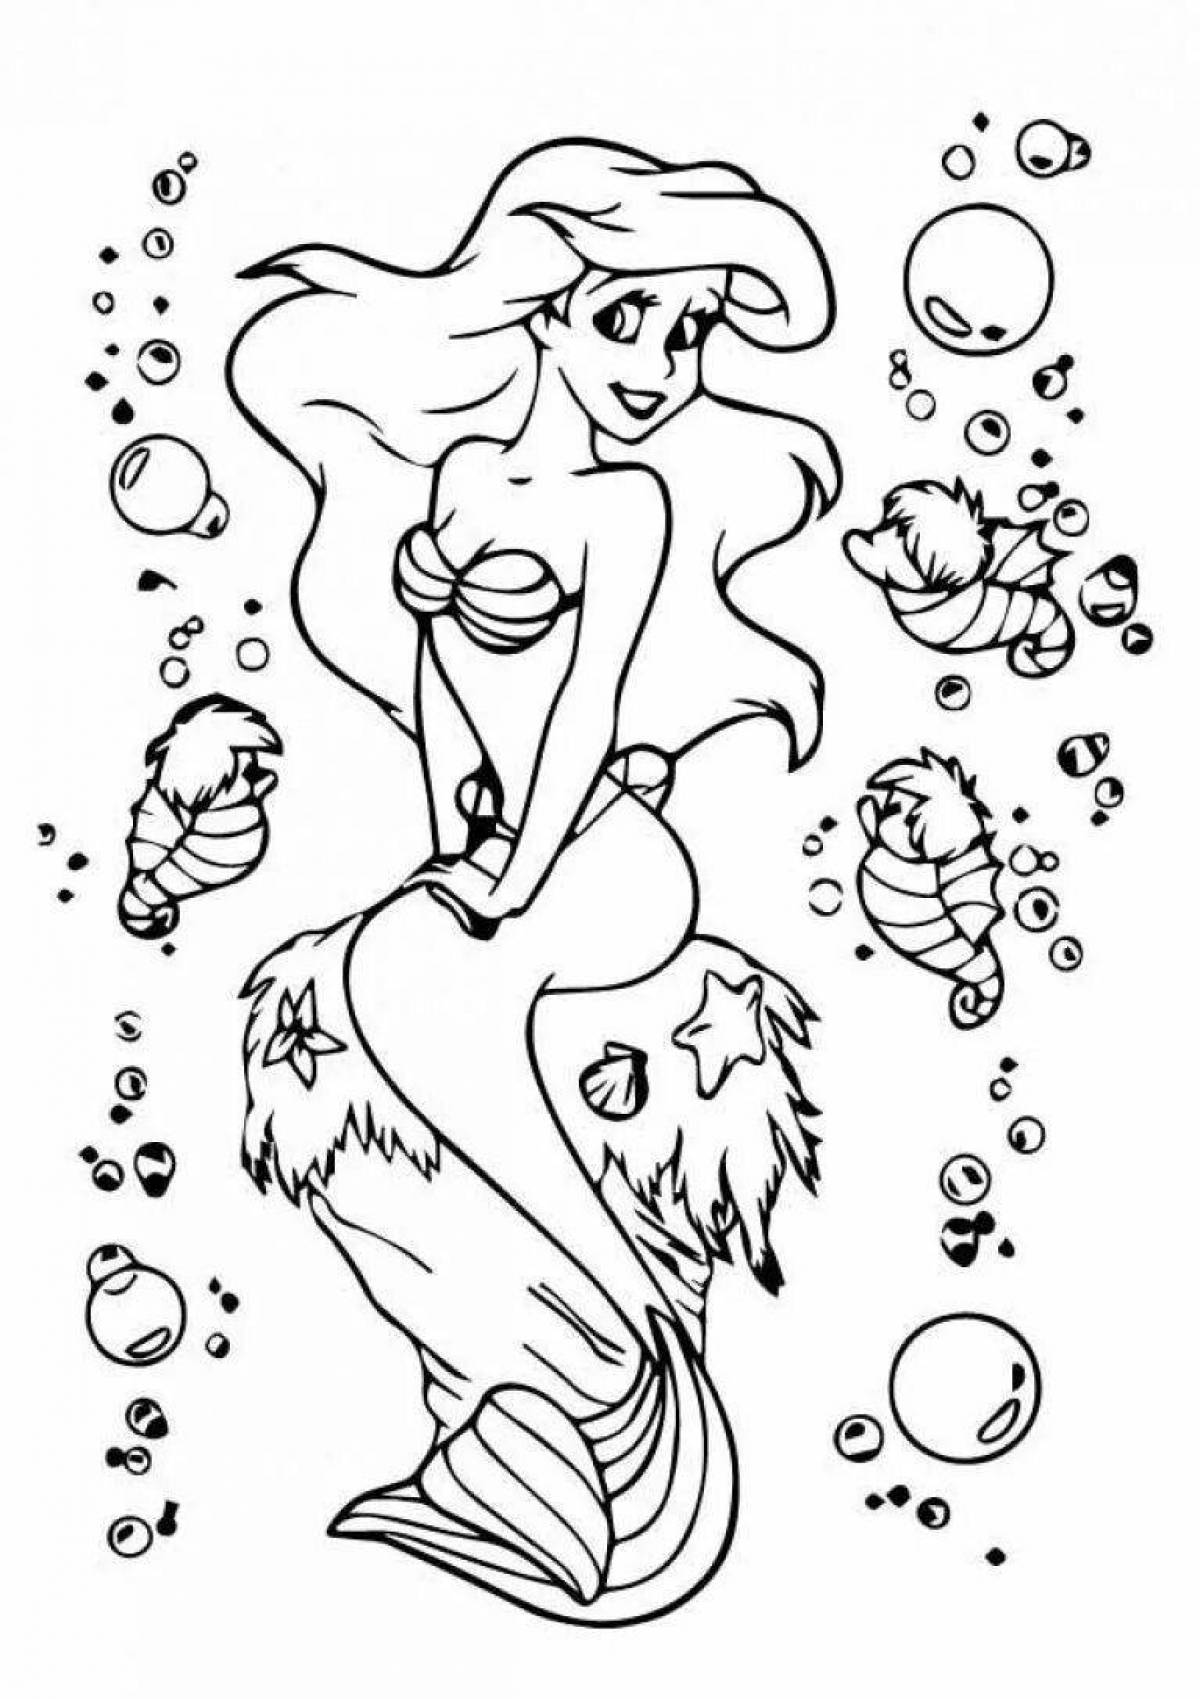 Charming ariel the little mermaid coloring book for kids